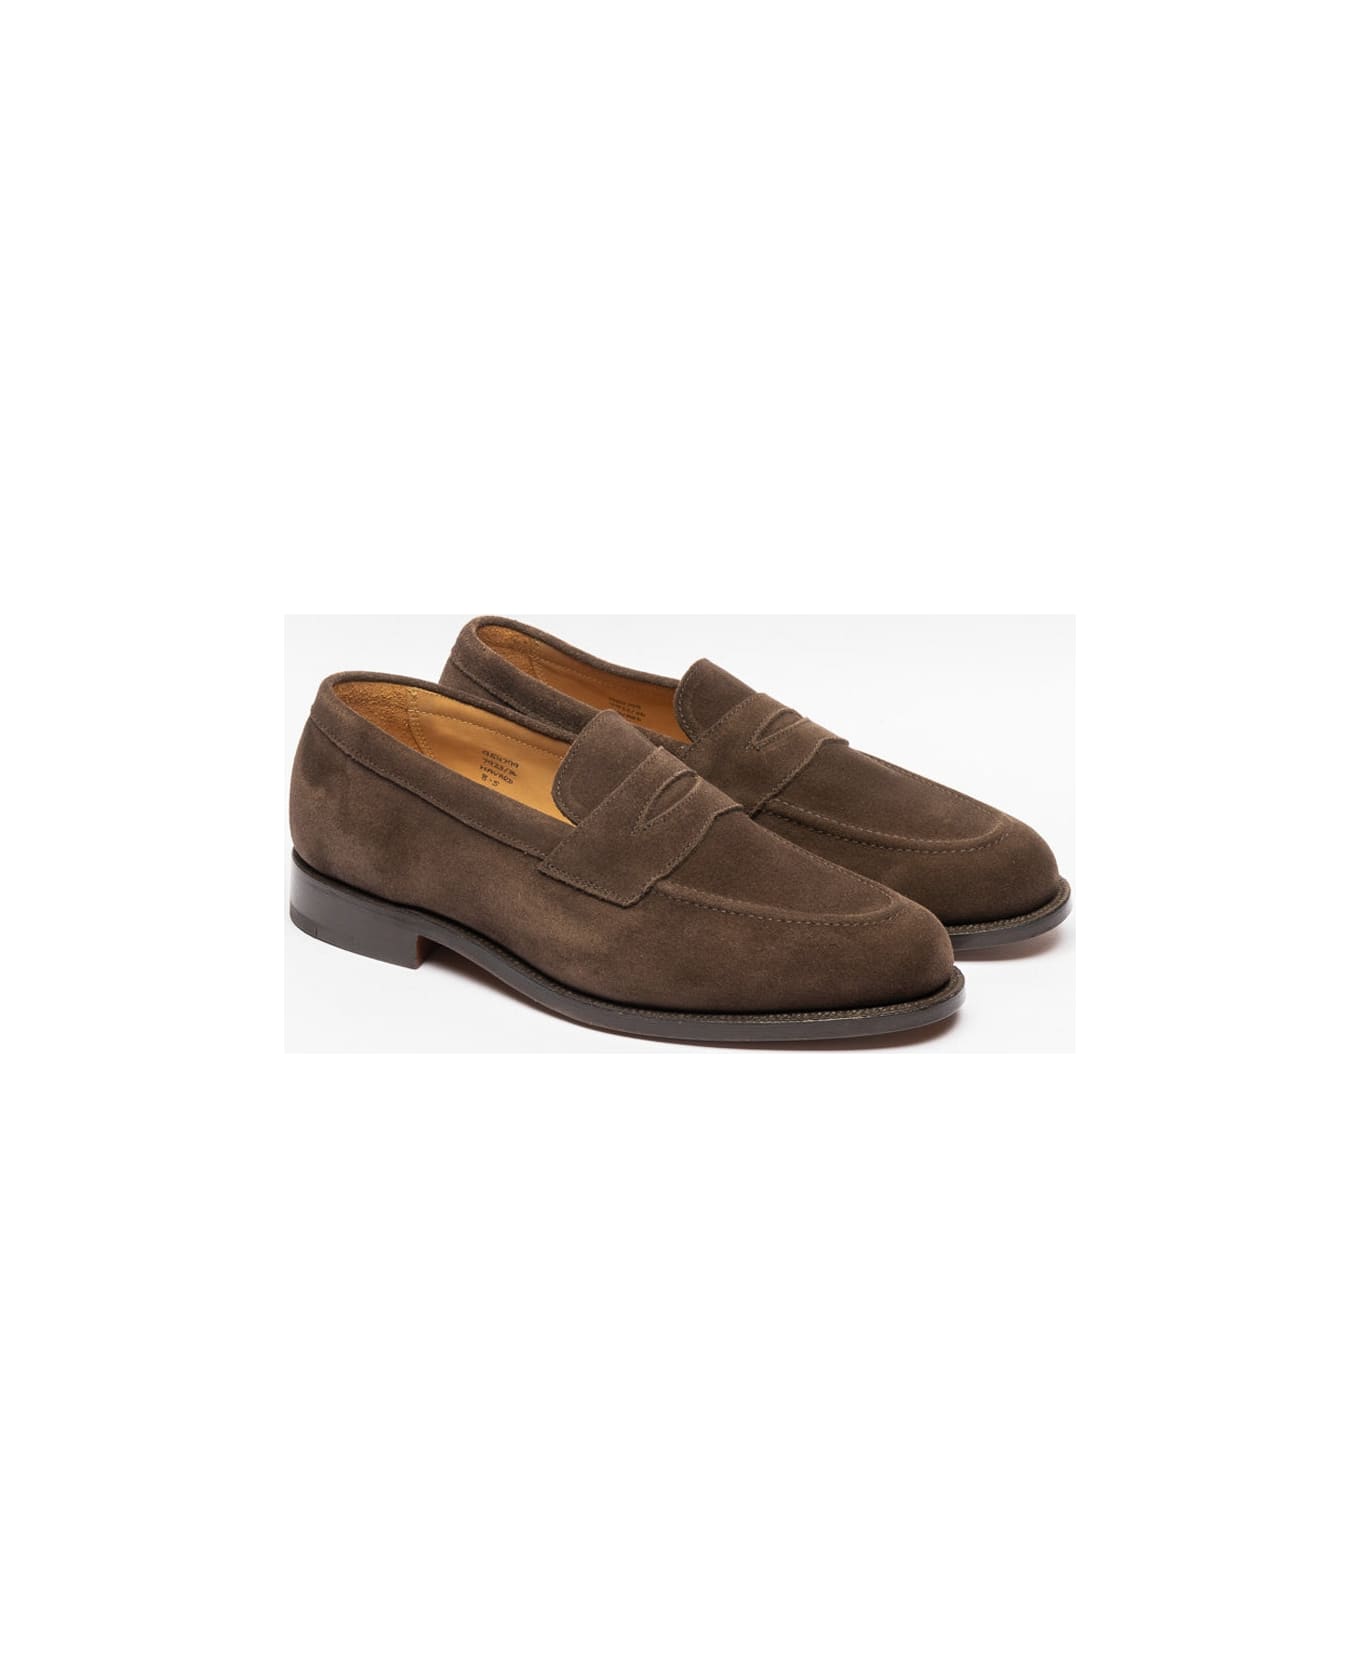 Tricker's Brown Suede Penny Loafer - Marrone